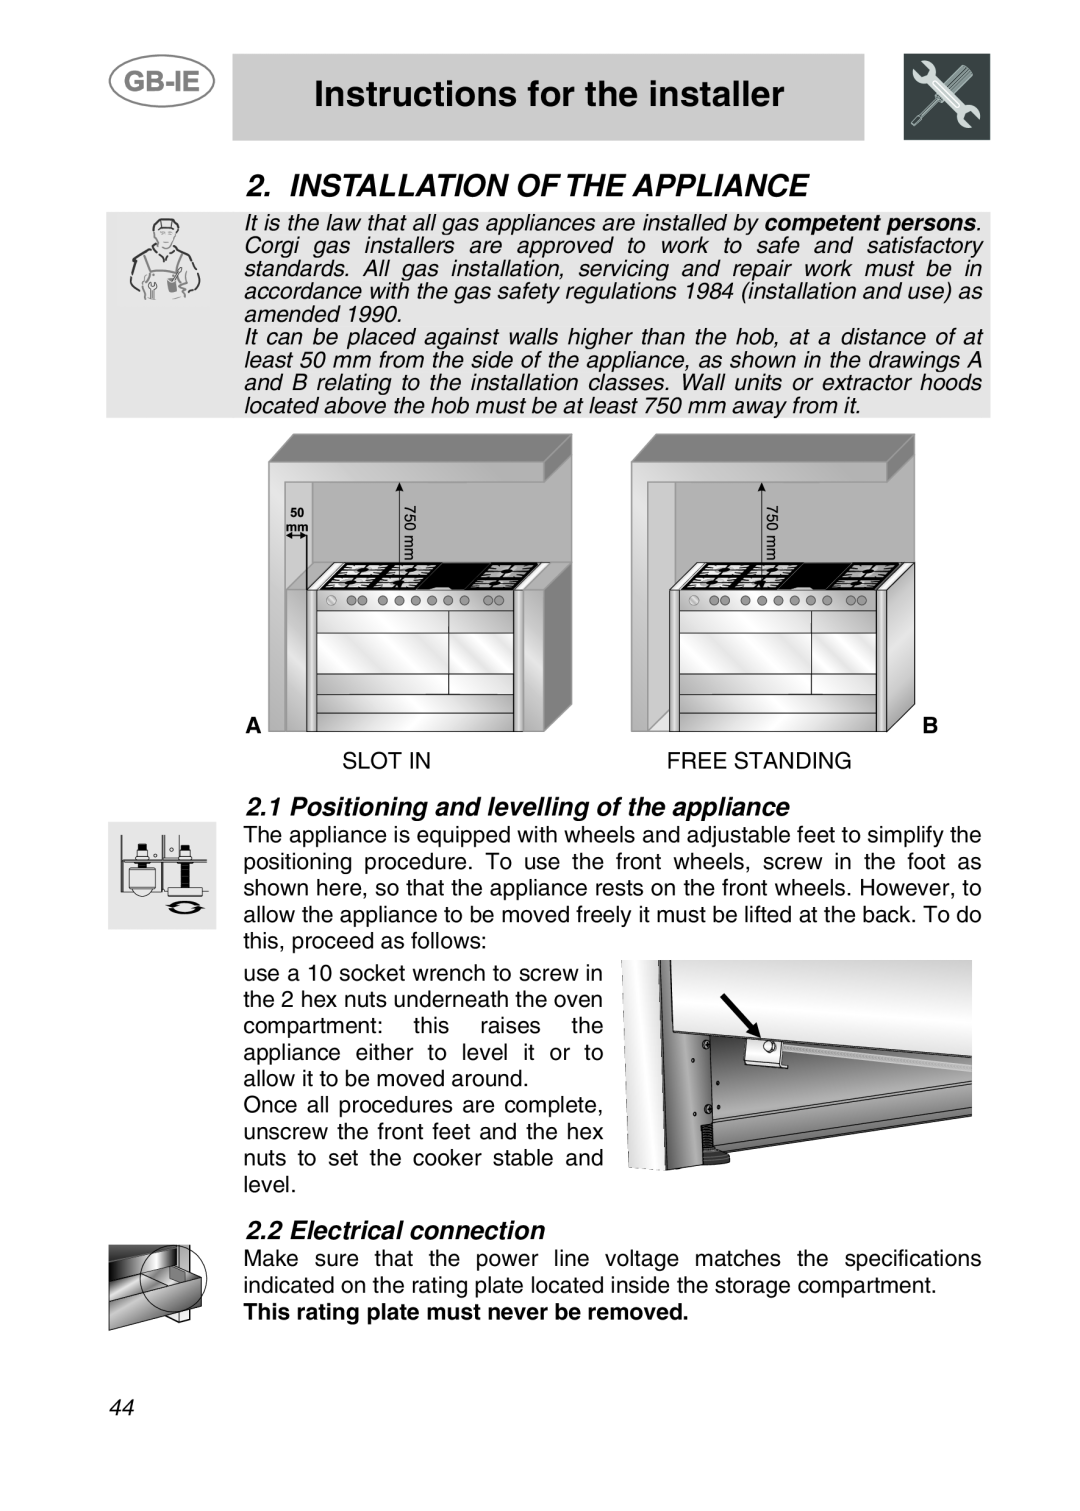 Smeg CS120-6 Instructions for the installer, Installation Of The Appliance, Positioning and levelling of the appliance 